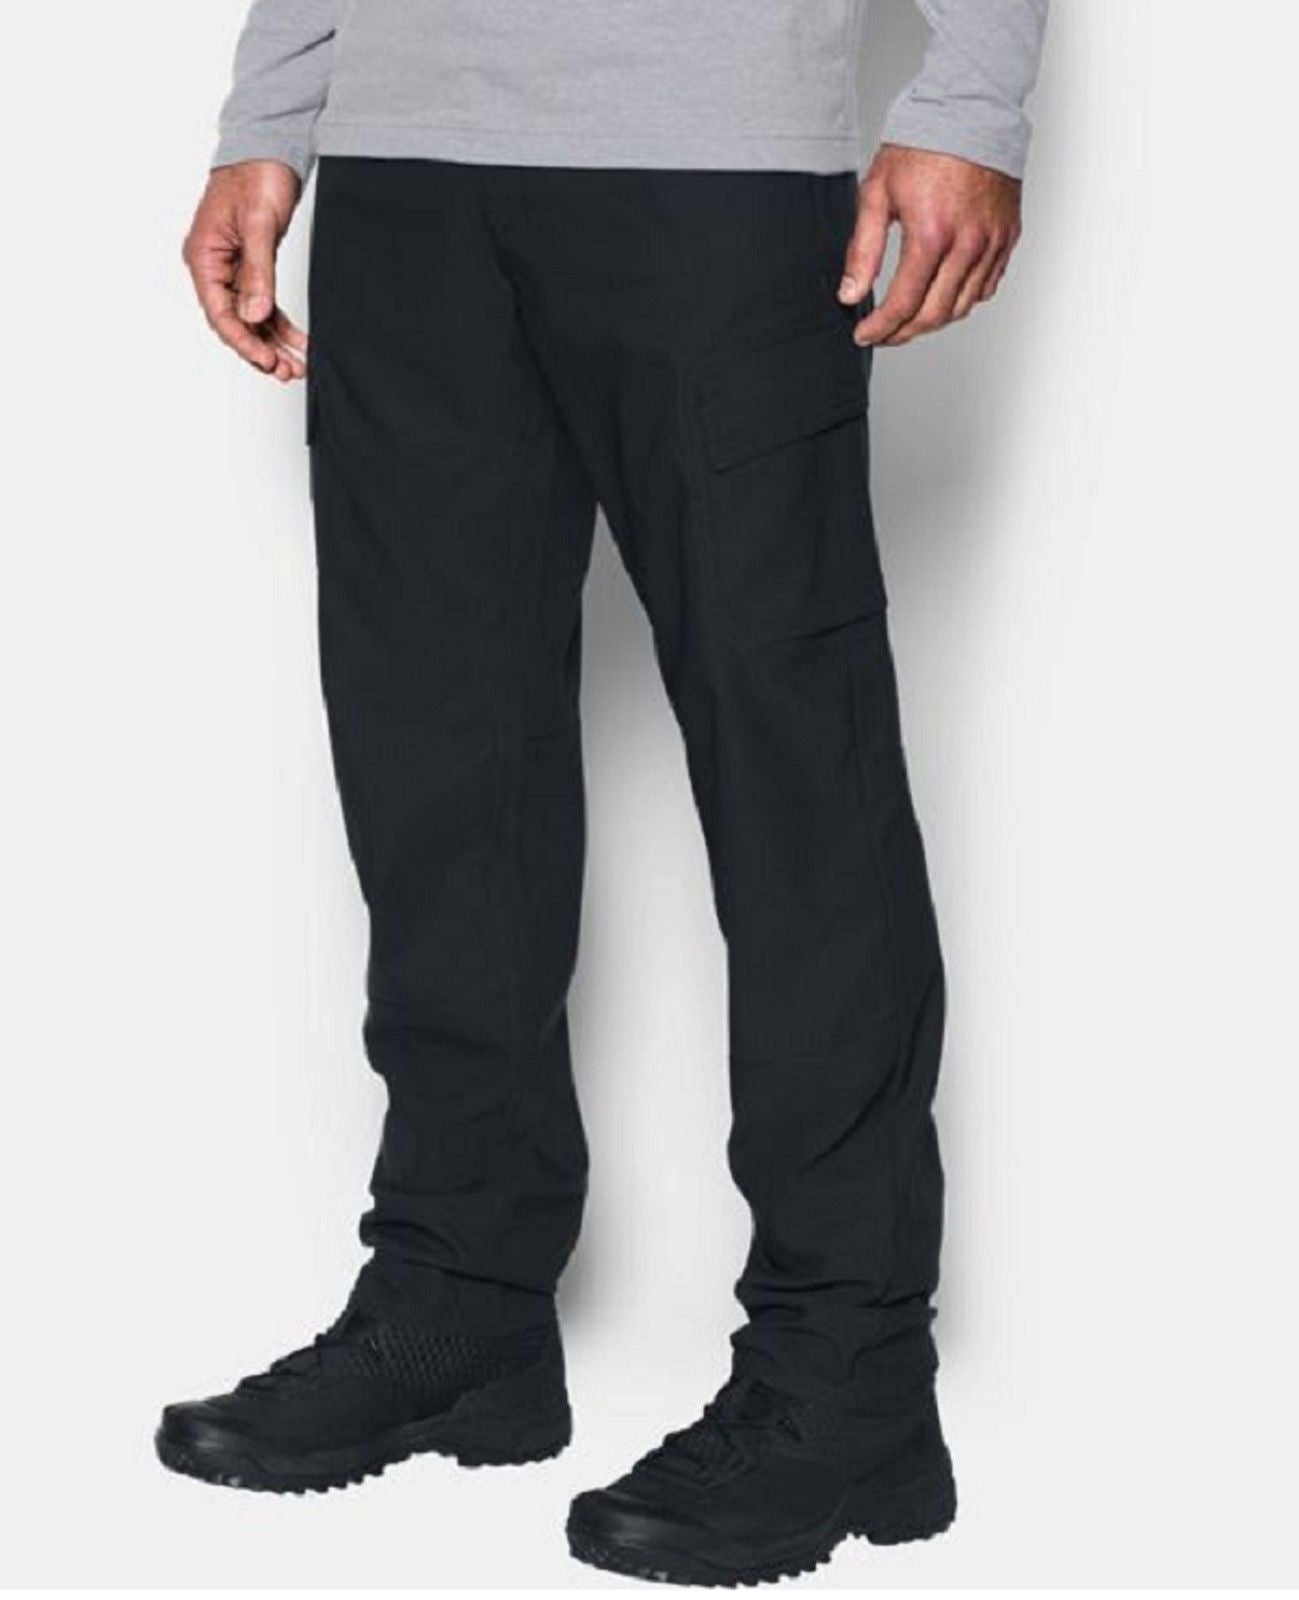 Under Armour Tactical Patrol Pants II - Conceal Carry Field Duty Cargo  Pants 